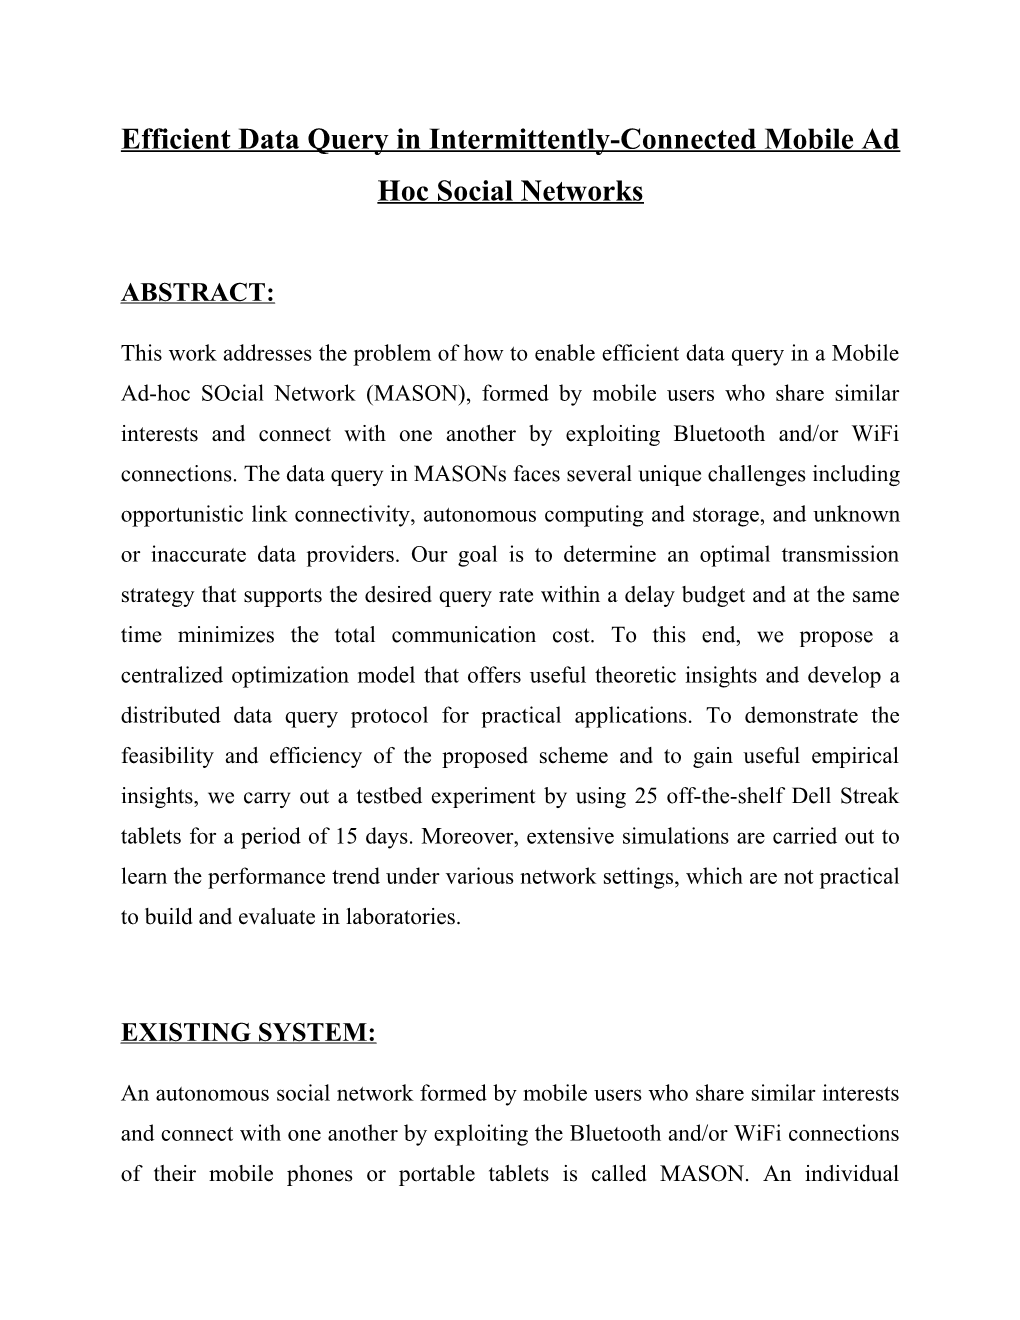 Efficient Data Query in Intermittently-Connectedmobile Ad Hoc Social Networks